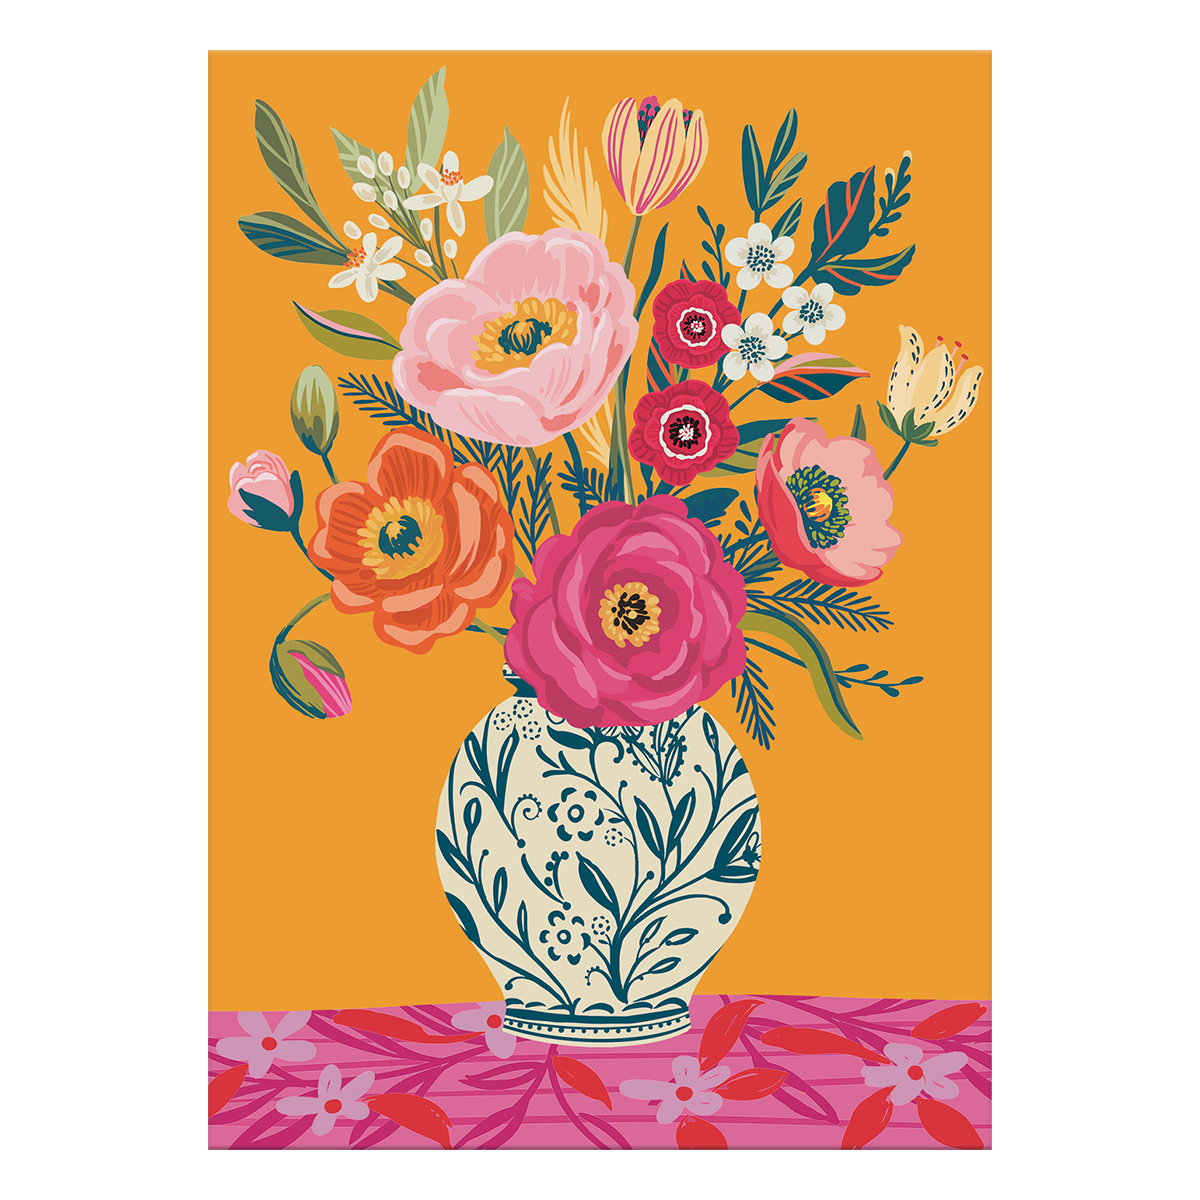 Vase Greeting Card Product